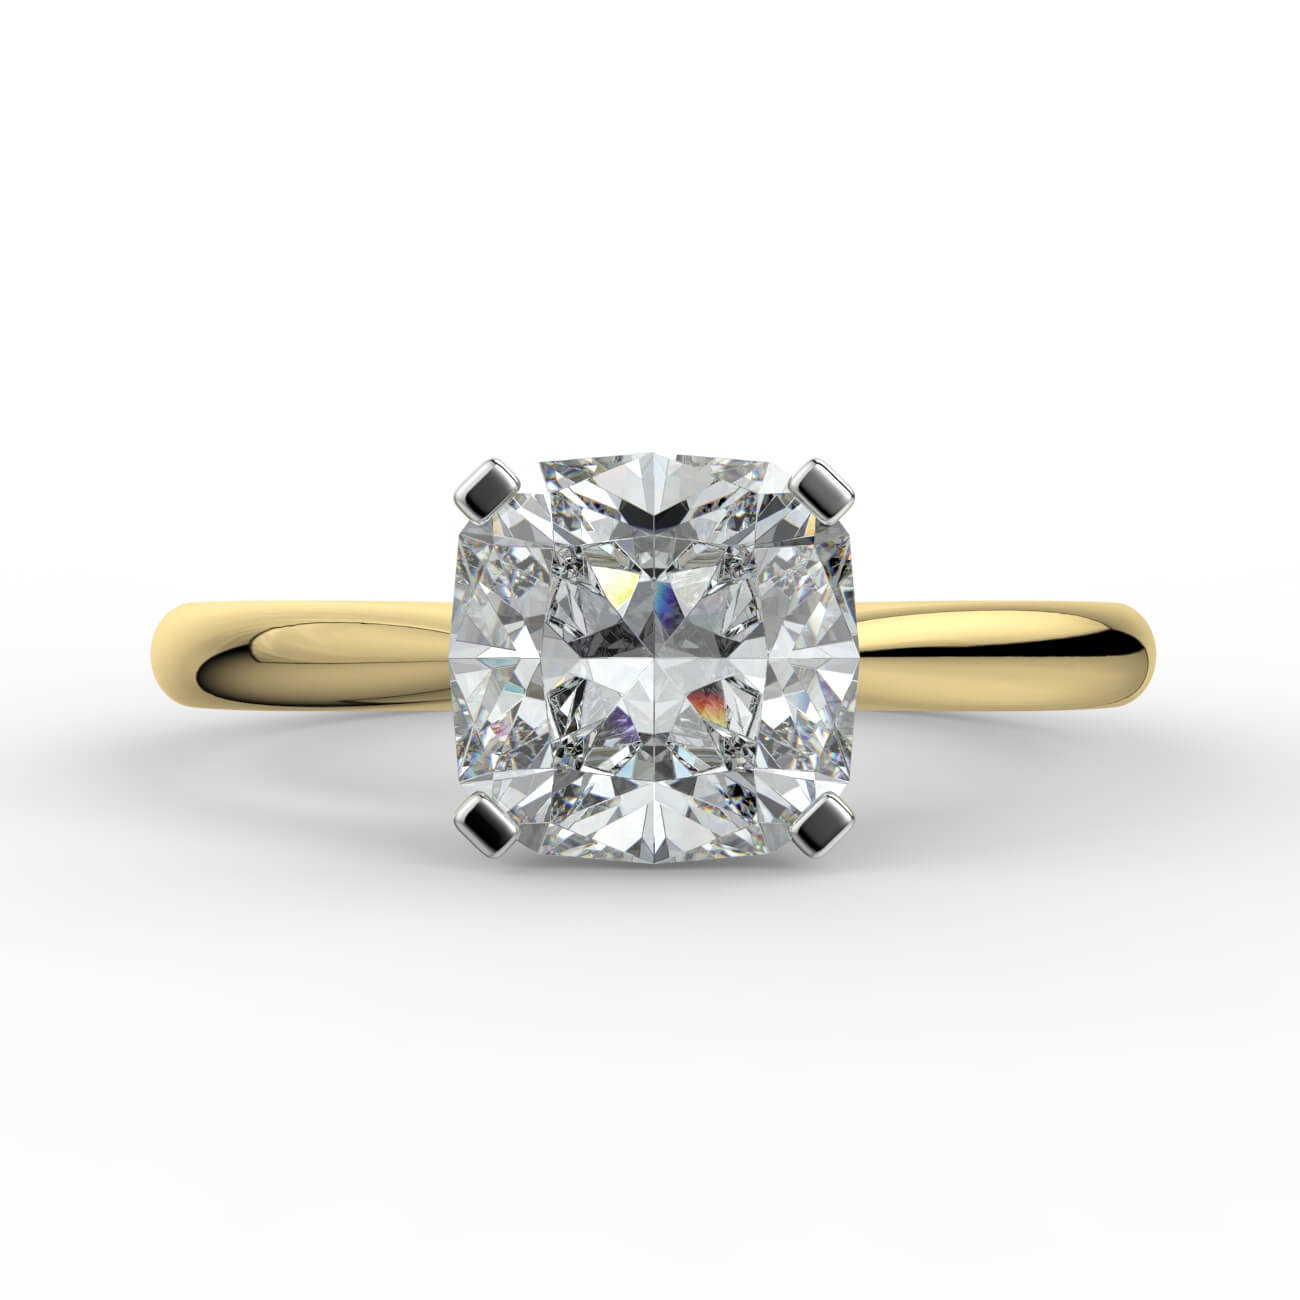 Cushion cut diamond cathedral engagement ring in white and yellow gold – Australian Diamond Network